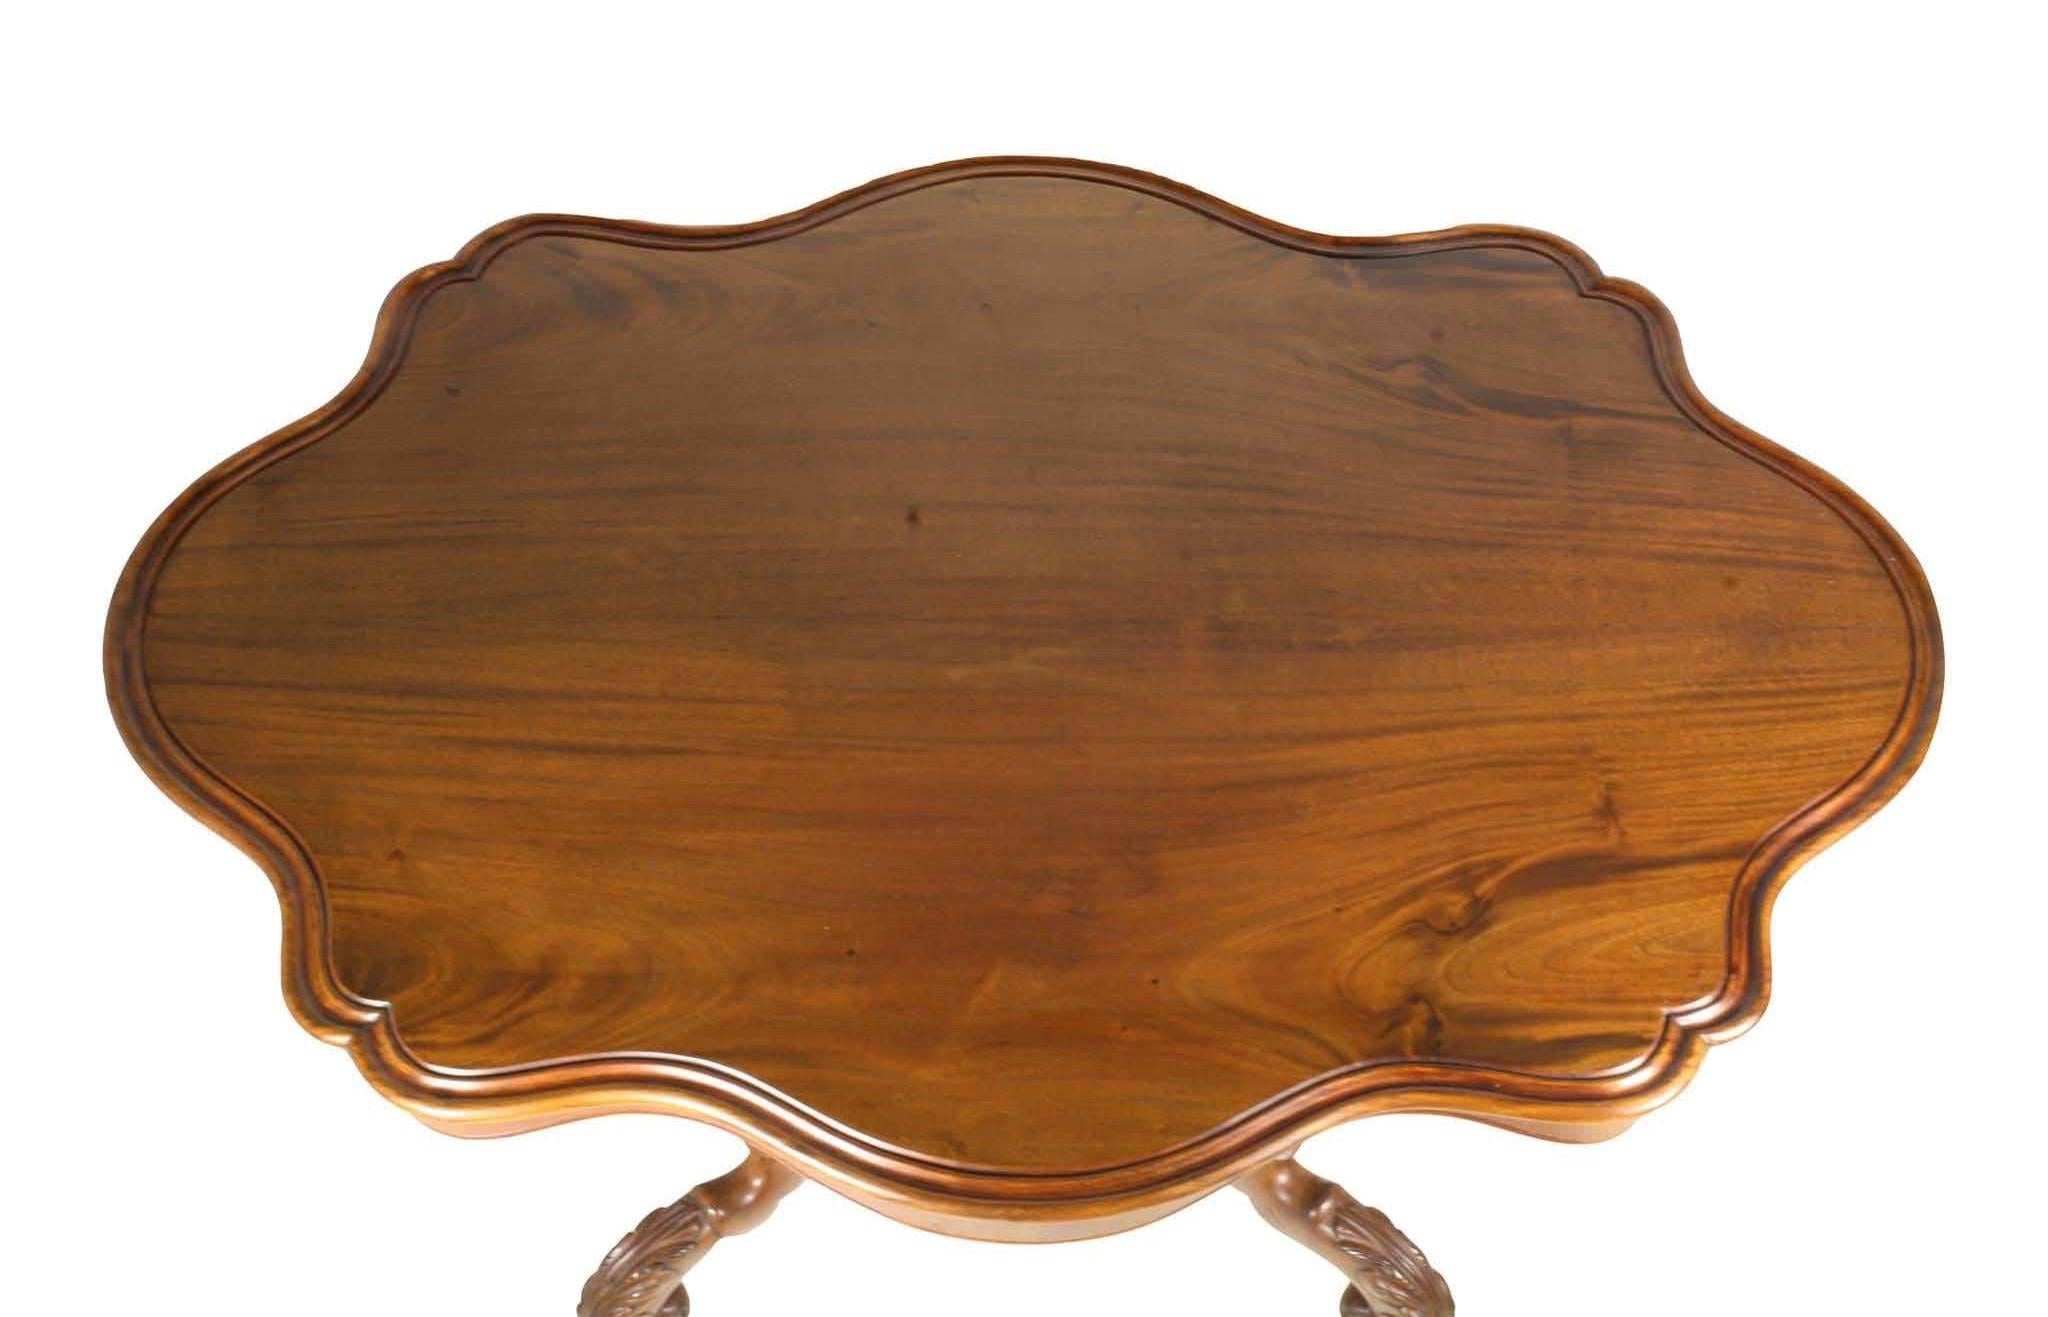 Fine scalloped edging creates the lines of this Dutch occasional table. A quartrefoil base with upper and lower finials is supported by scrolled feet on castors. The mirrored 3/4 inch tabletop is cut of solid mahogany, unlike the many veneered